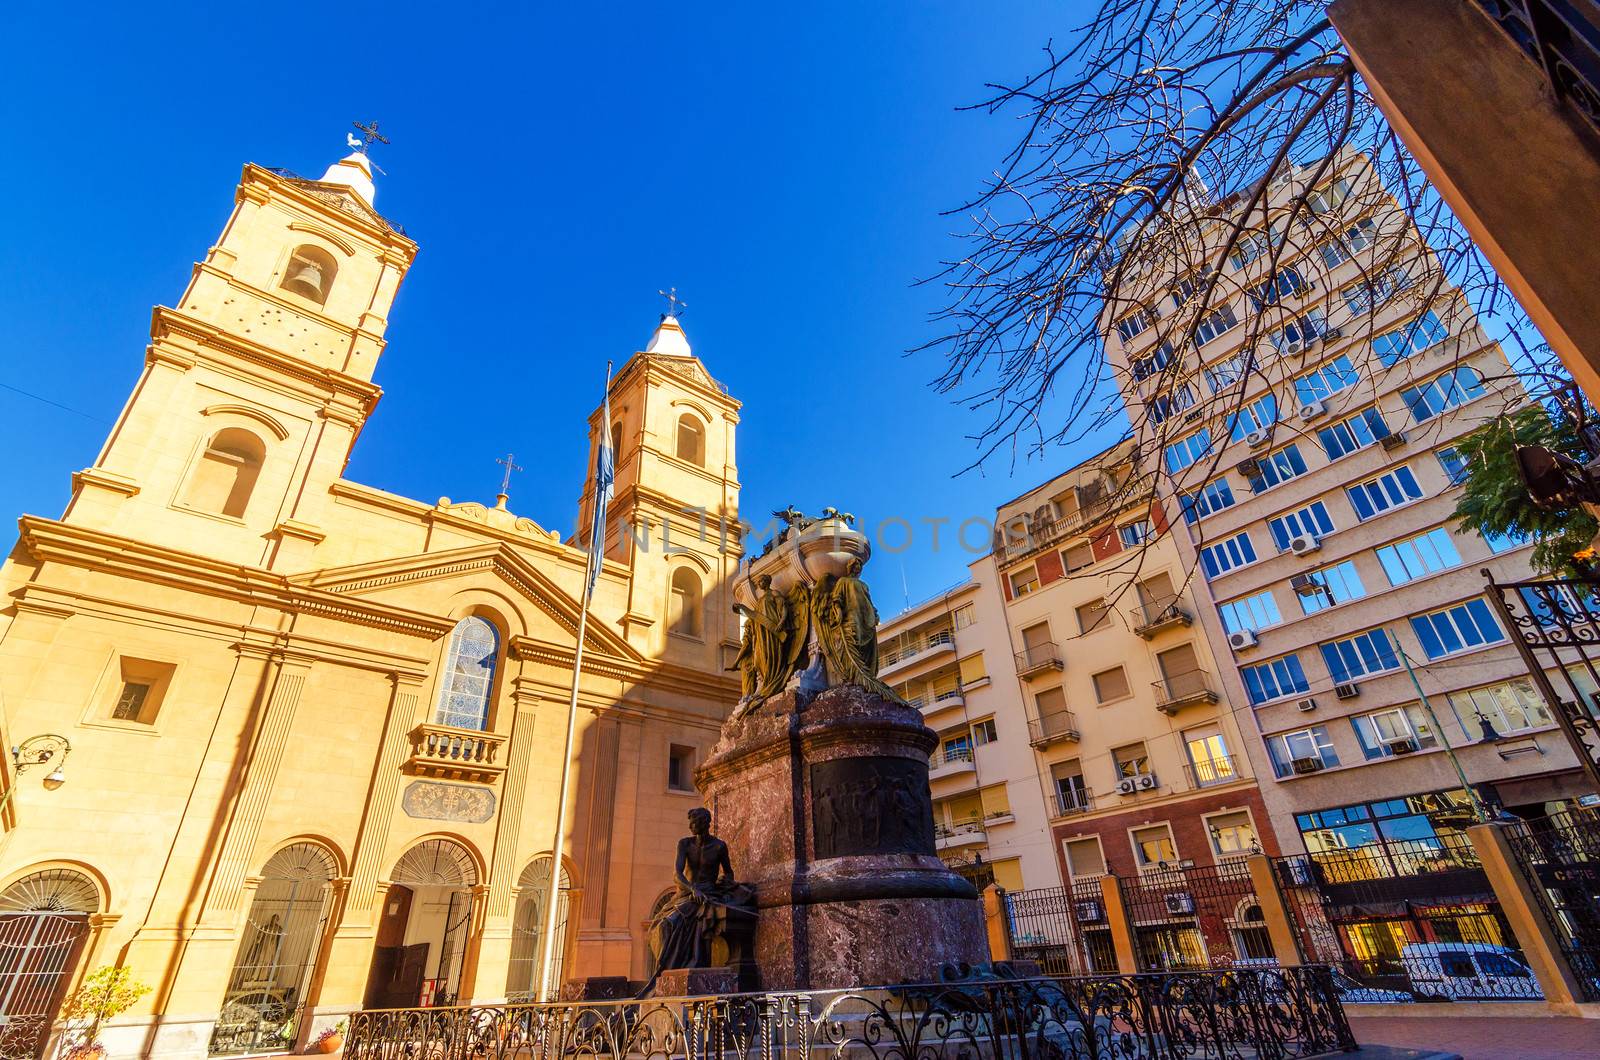 Santo Domingo church and convent in the San Telmo neighborhood of Buenos Aires, Argentina